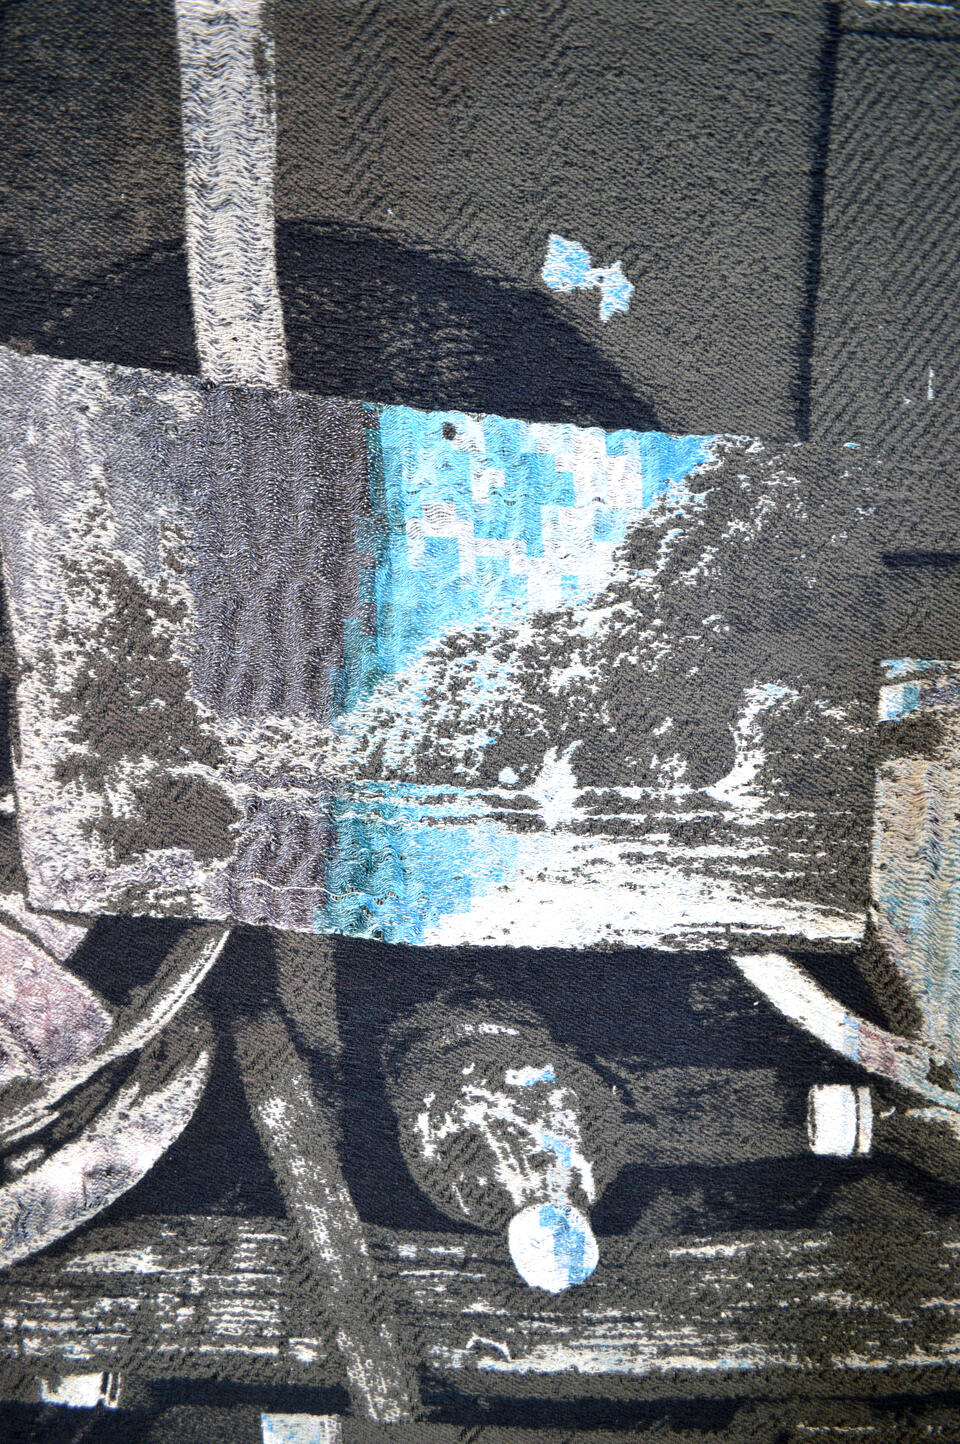 An image depicting a close up of a weaving. The close up shows one repeat of a larger work with a landscape and a plastic bottle in a greyscale color palette.